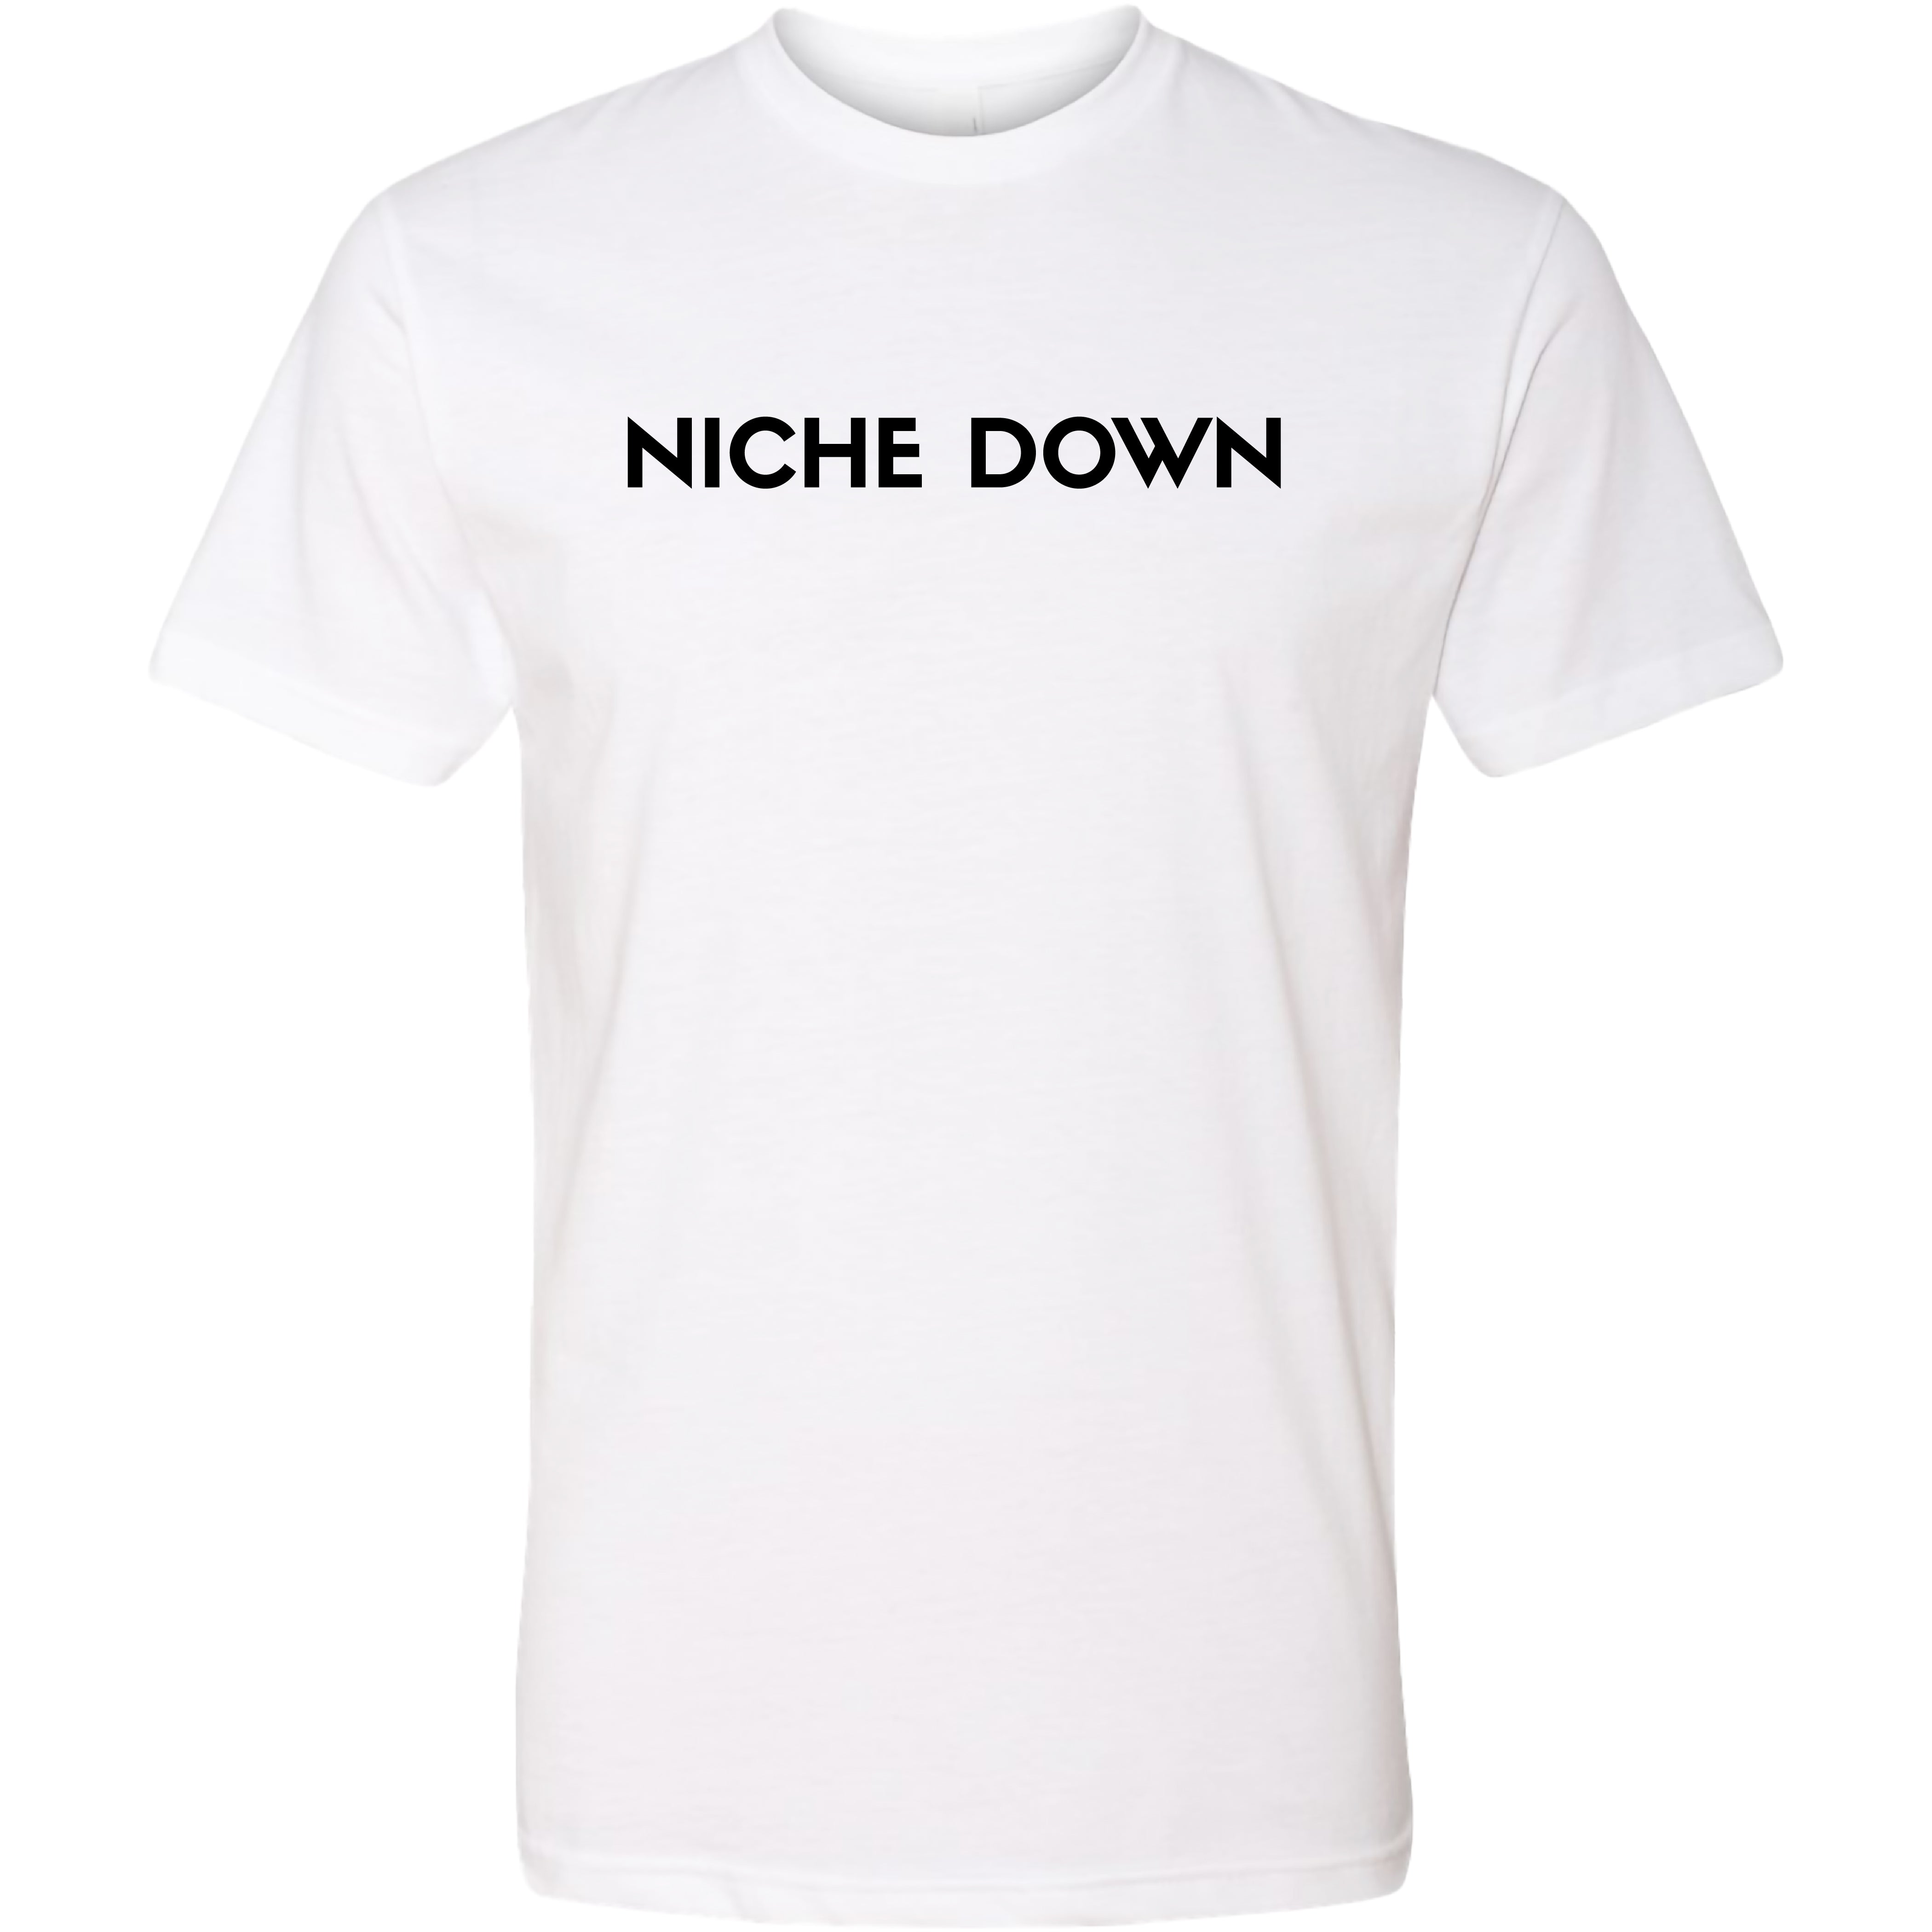 Freelance with Phil - Niche Down Tee